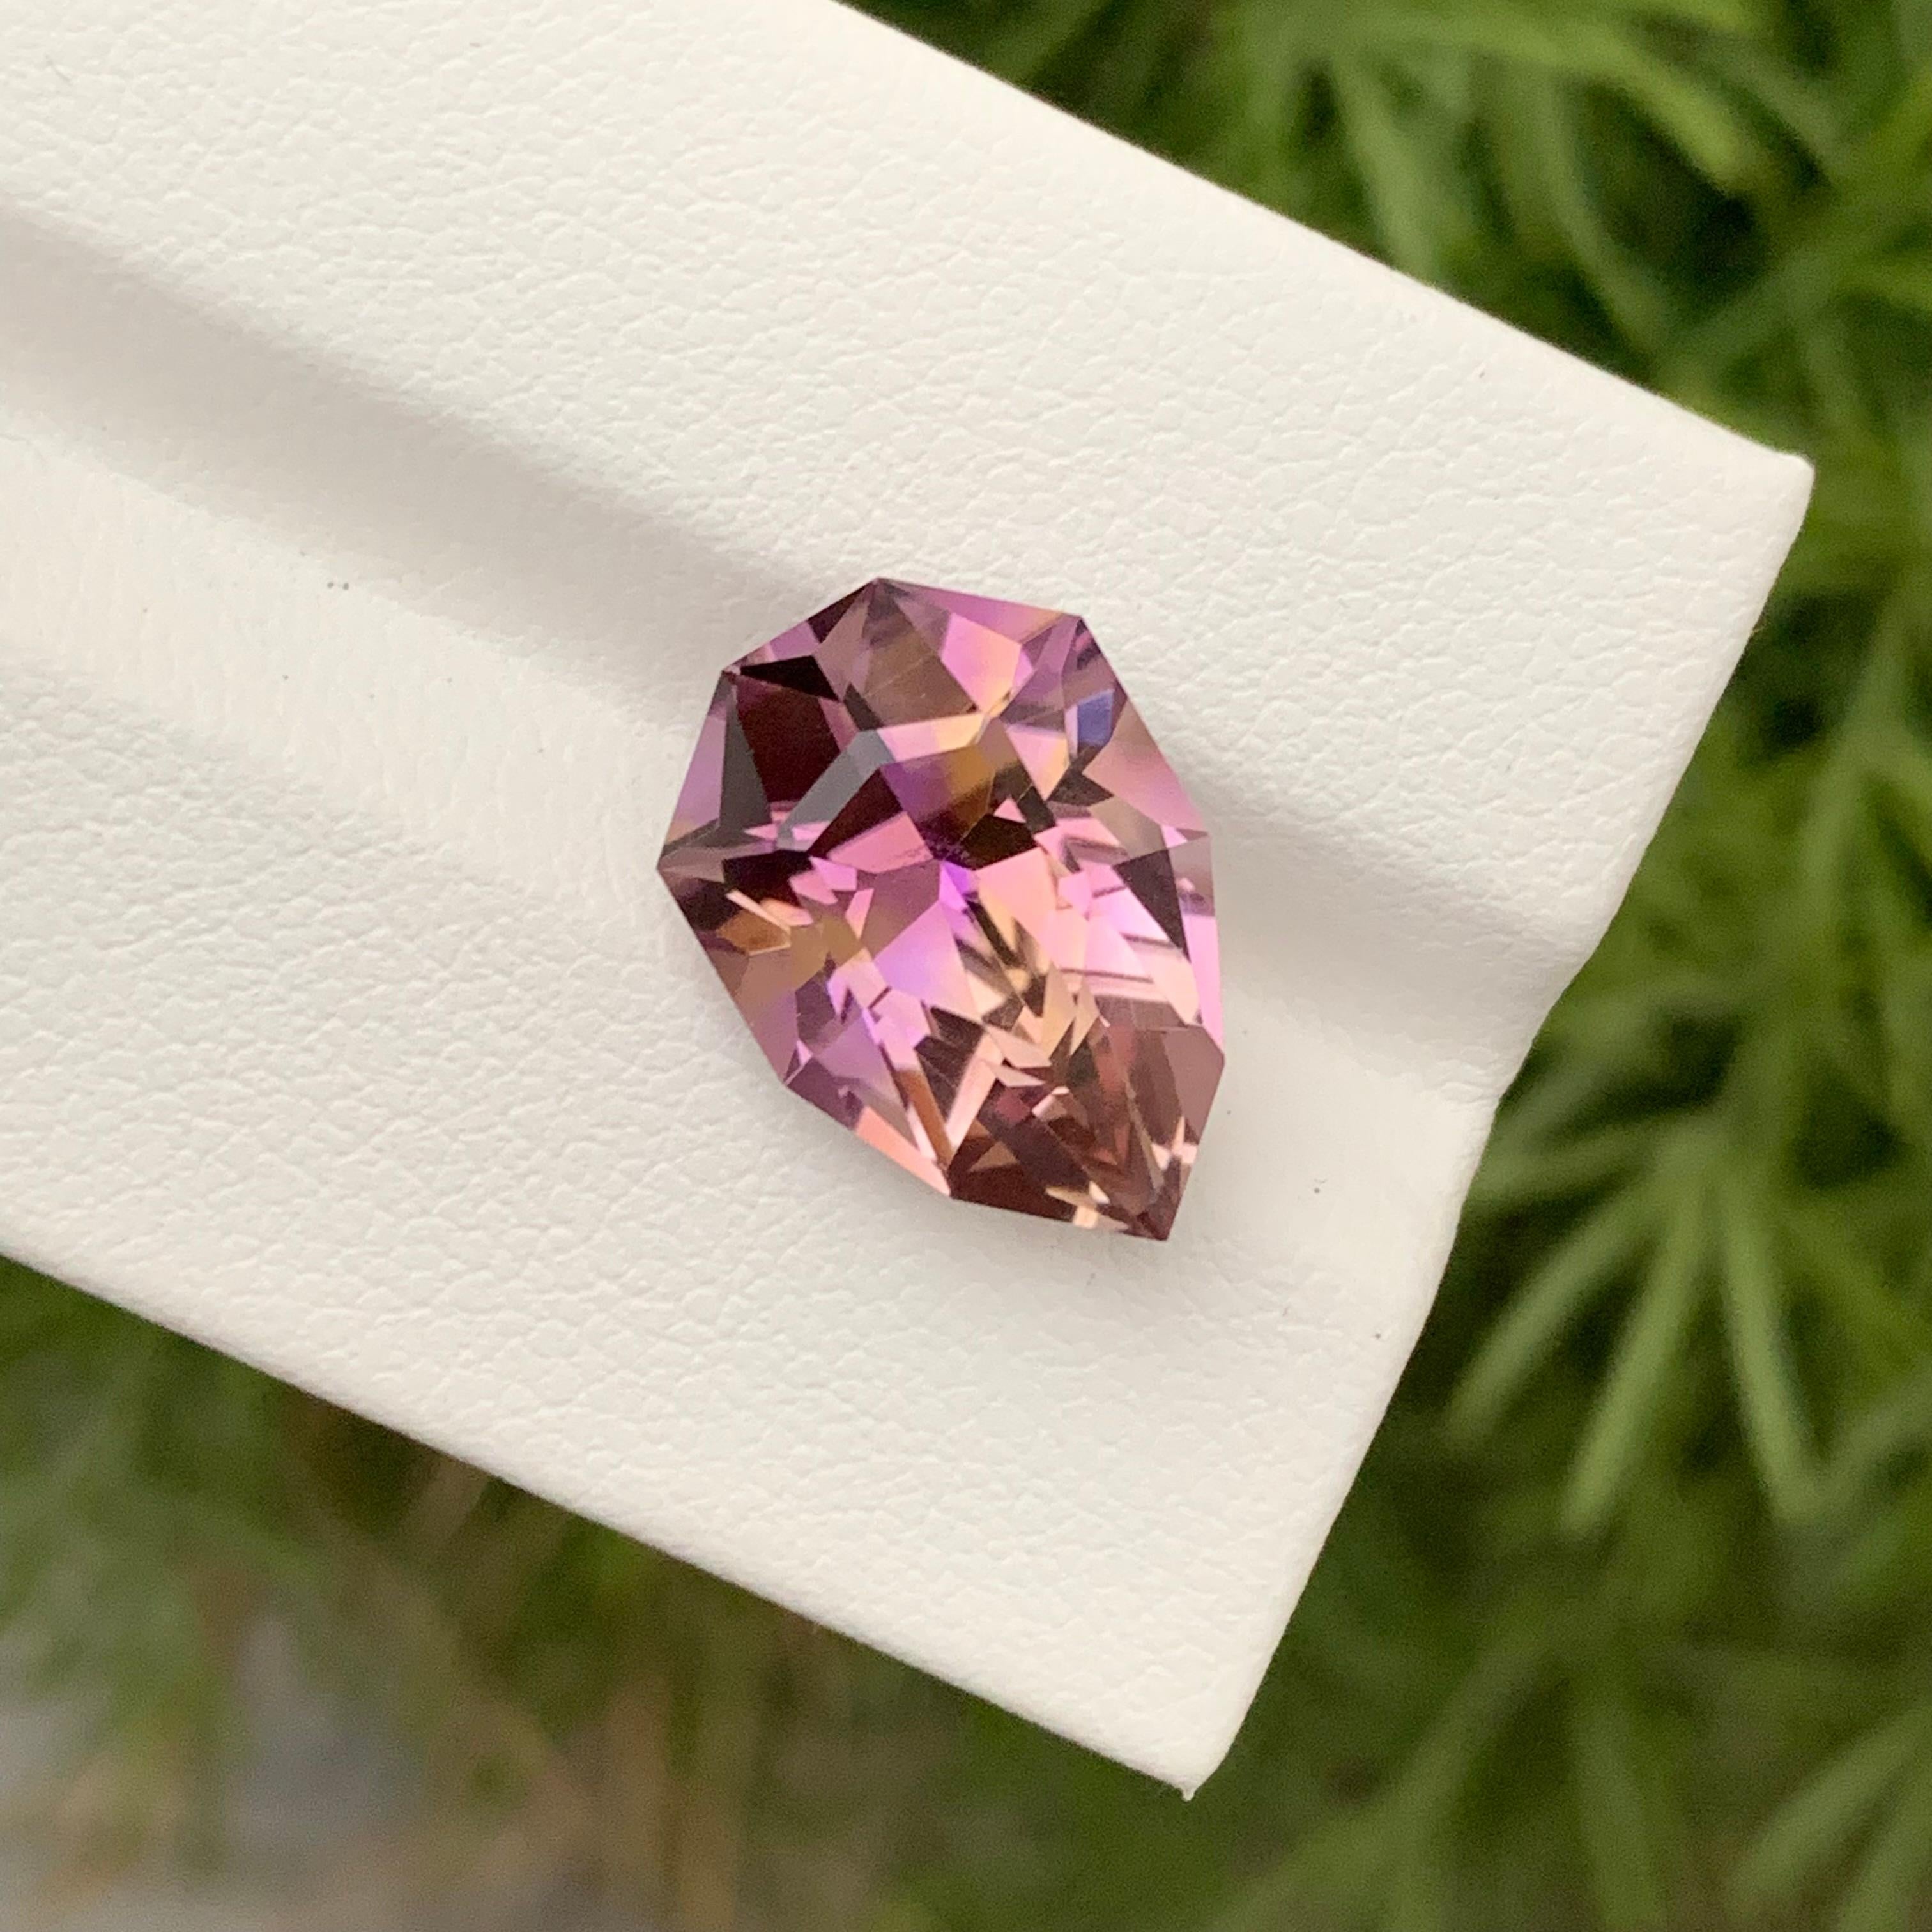 Arts and Crafts Shield Shape Loose Ametrine Gem For Necklace 7.85 Carats  For Sale